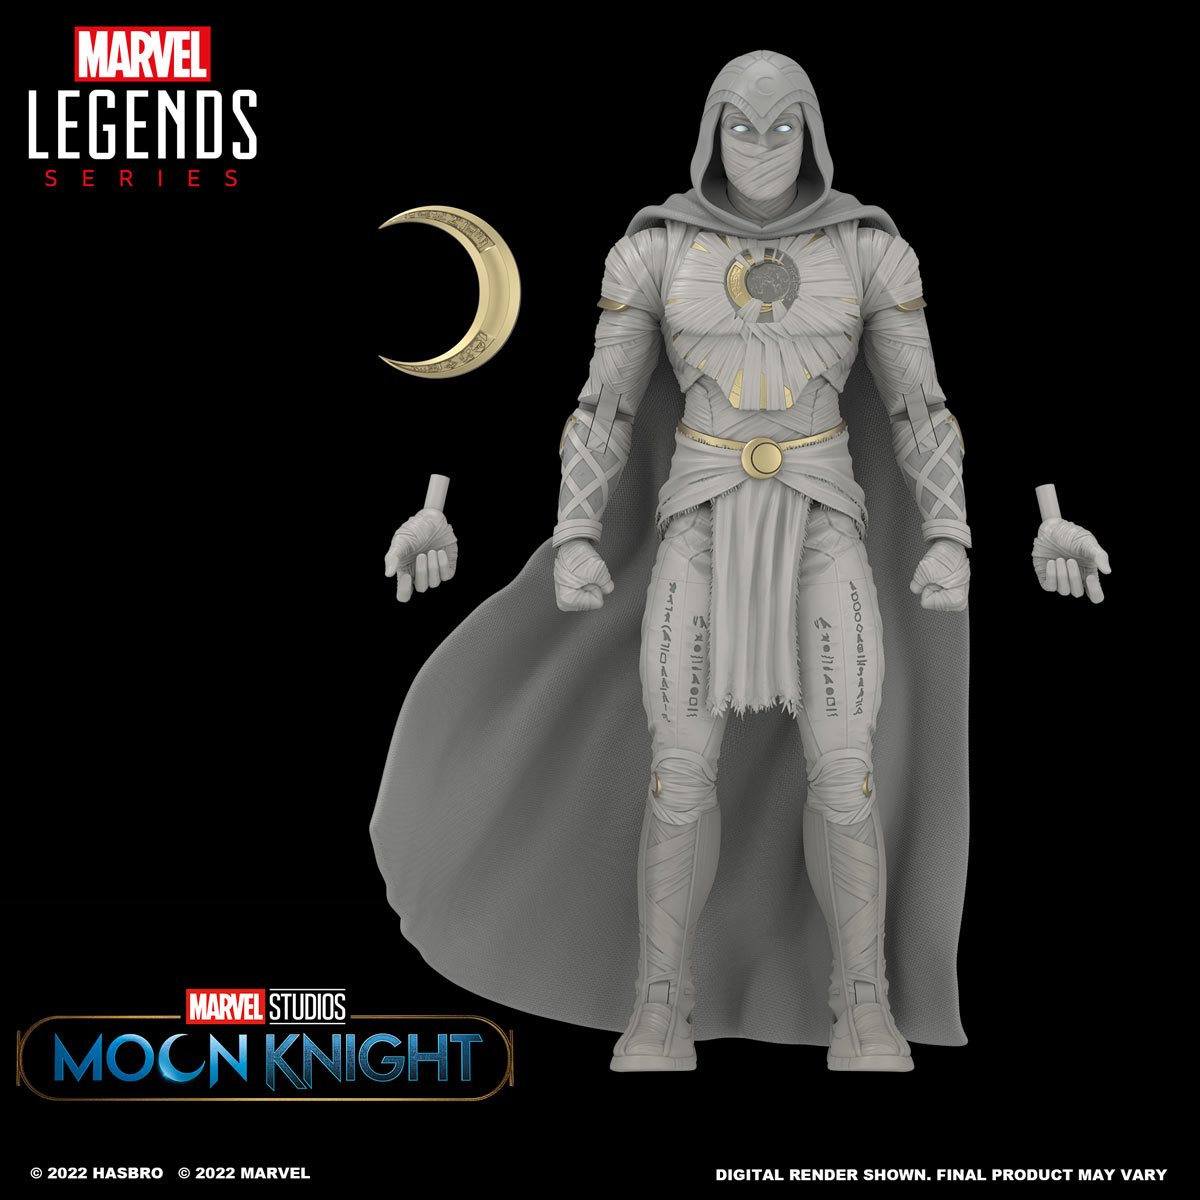 MARVEL LEGENDS SERIES MOON KNIGHT EXCLUSIVE 6" ACTION FIGURE PRE ORDER